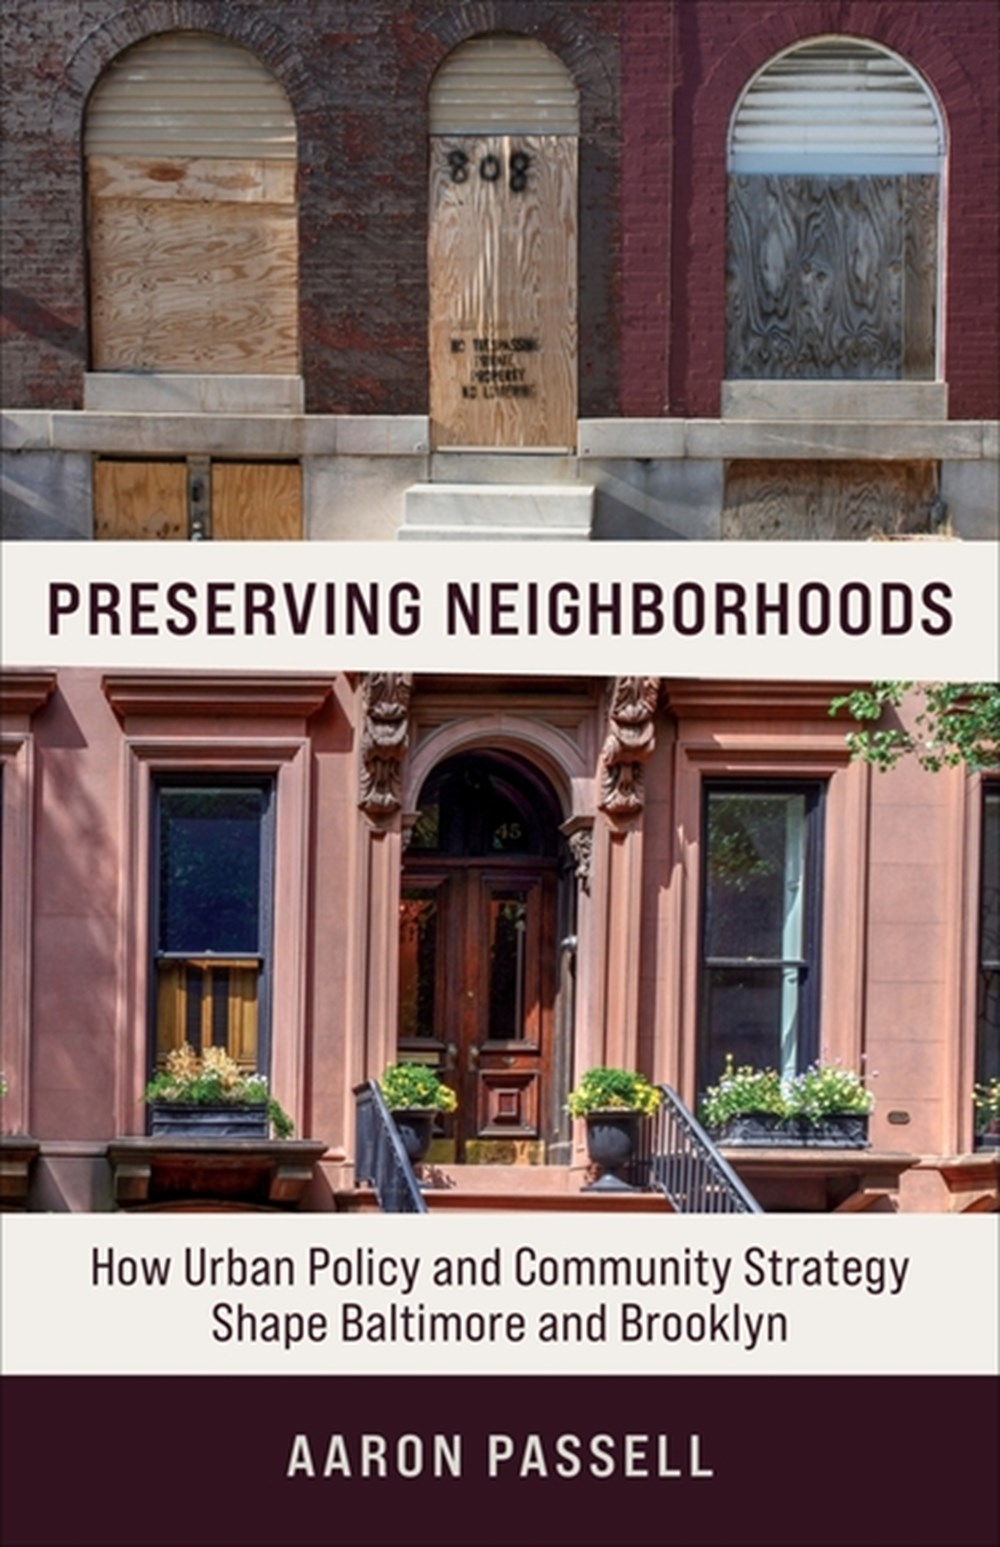 Preserving Neighborhoods: How Urban Policy and Community Strategy Shape Baltimore and Brooklyn